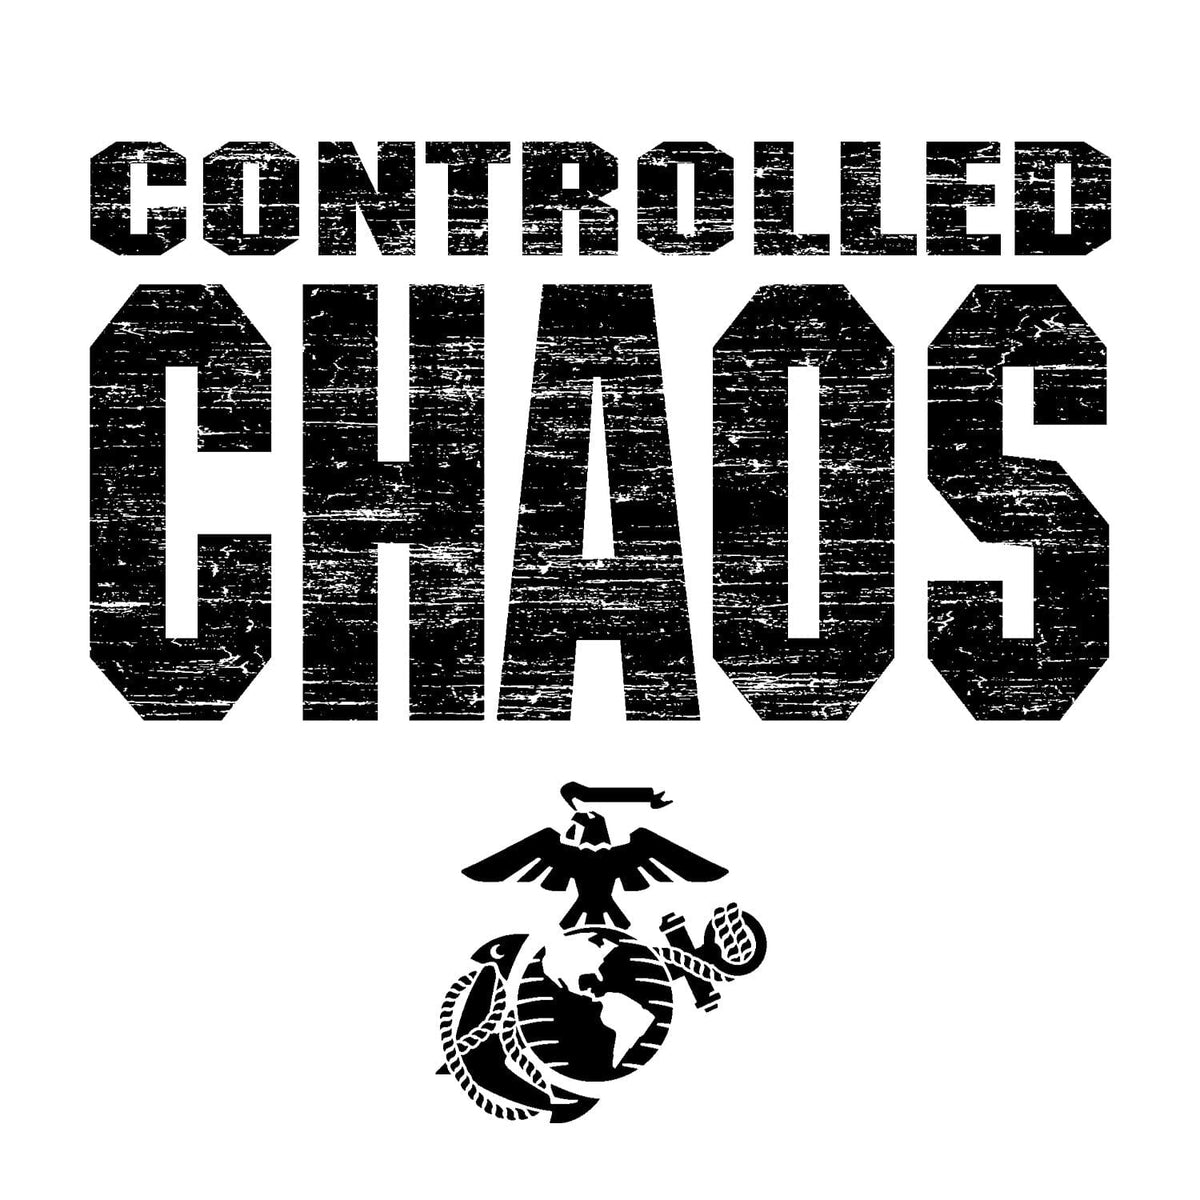 Marines Controlled Chaos 2-Sided Hoodie